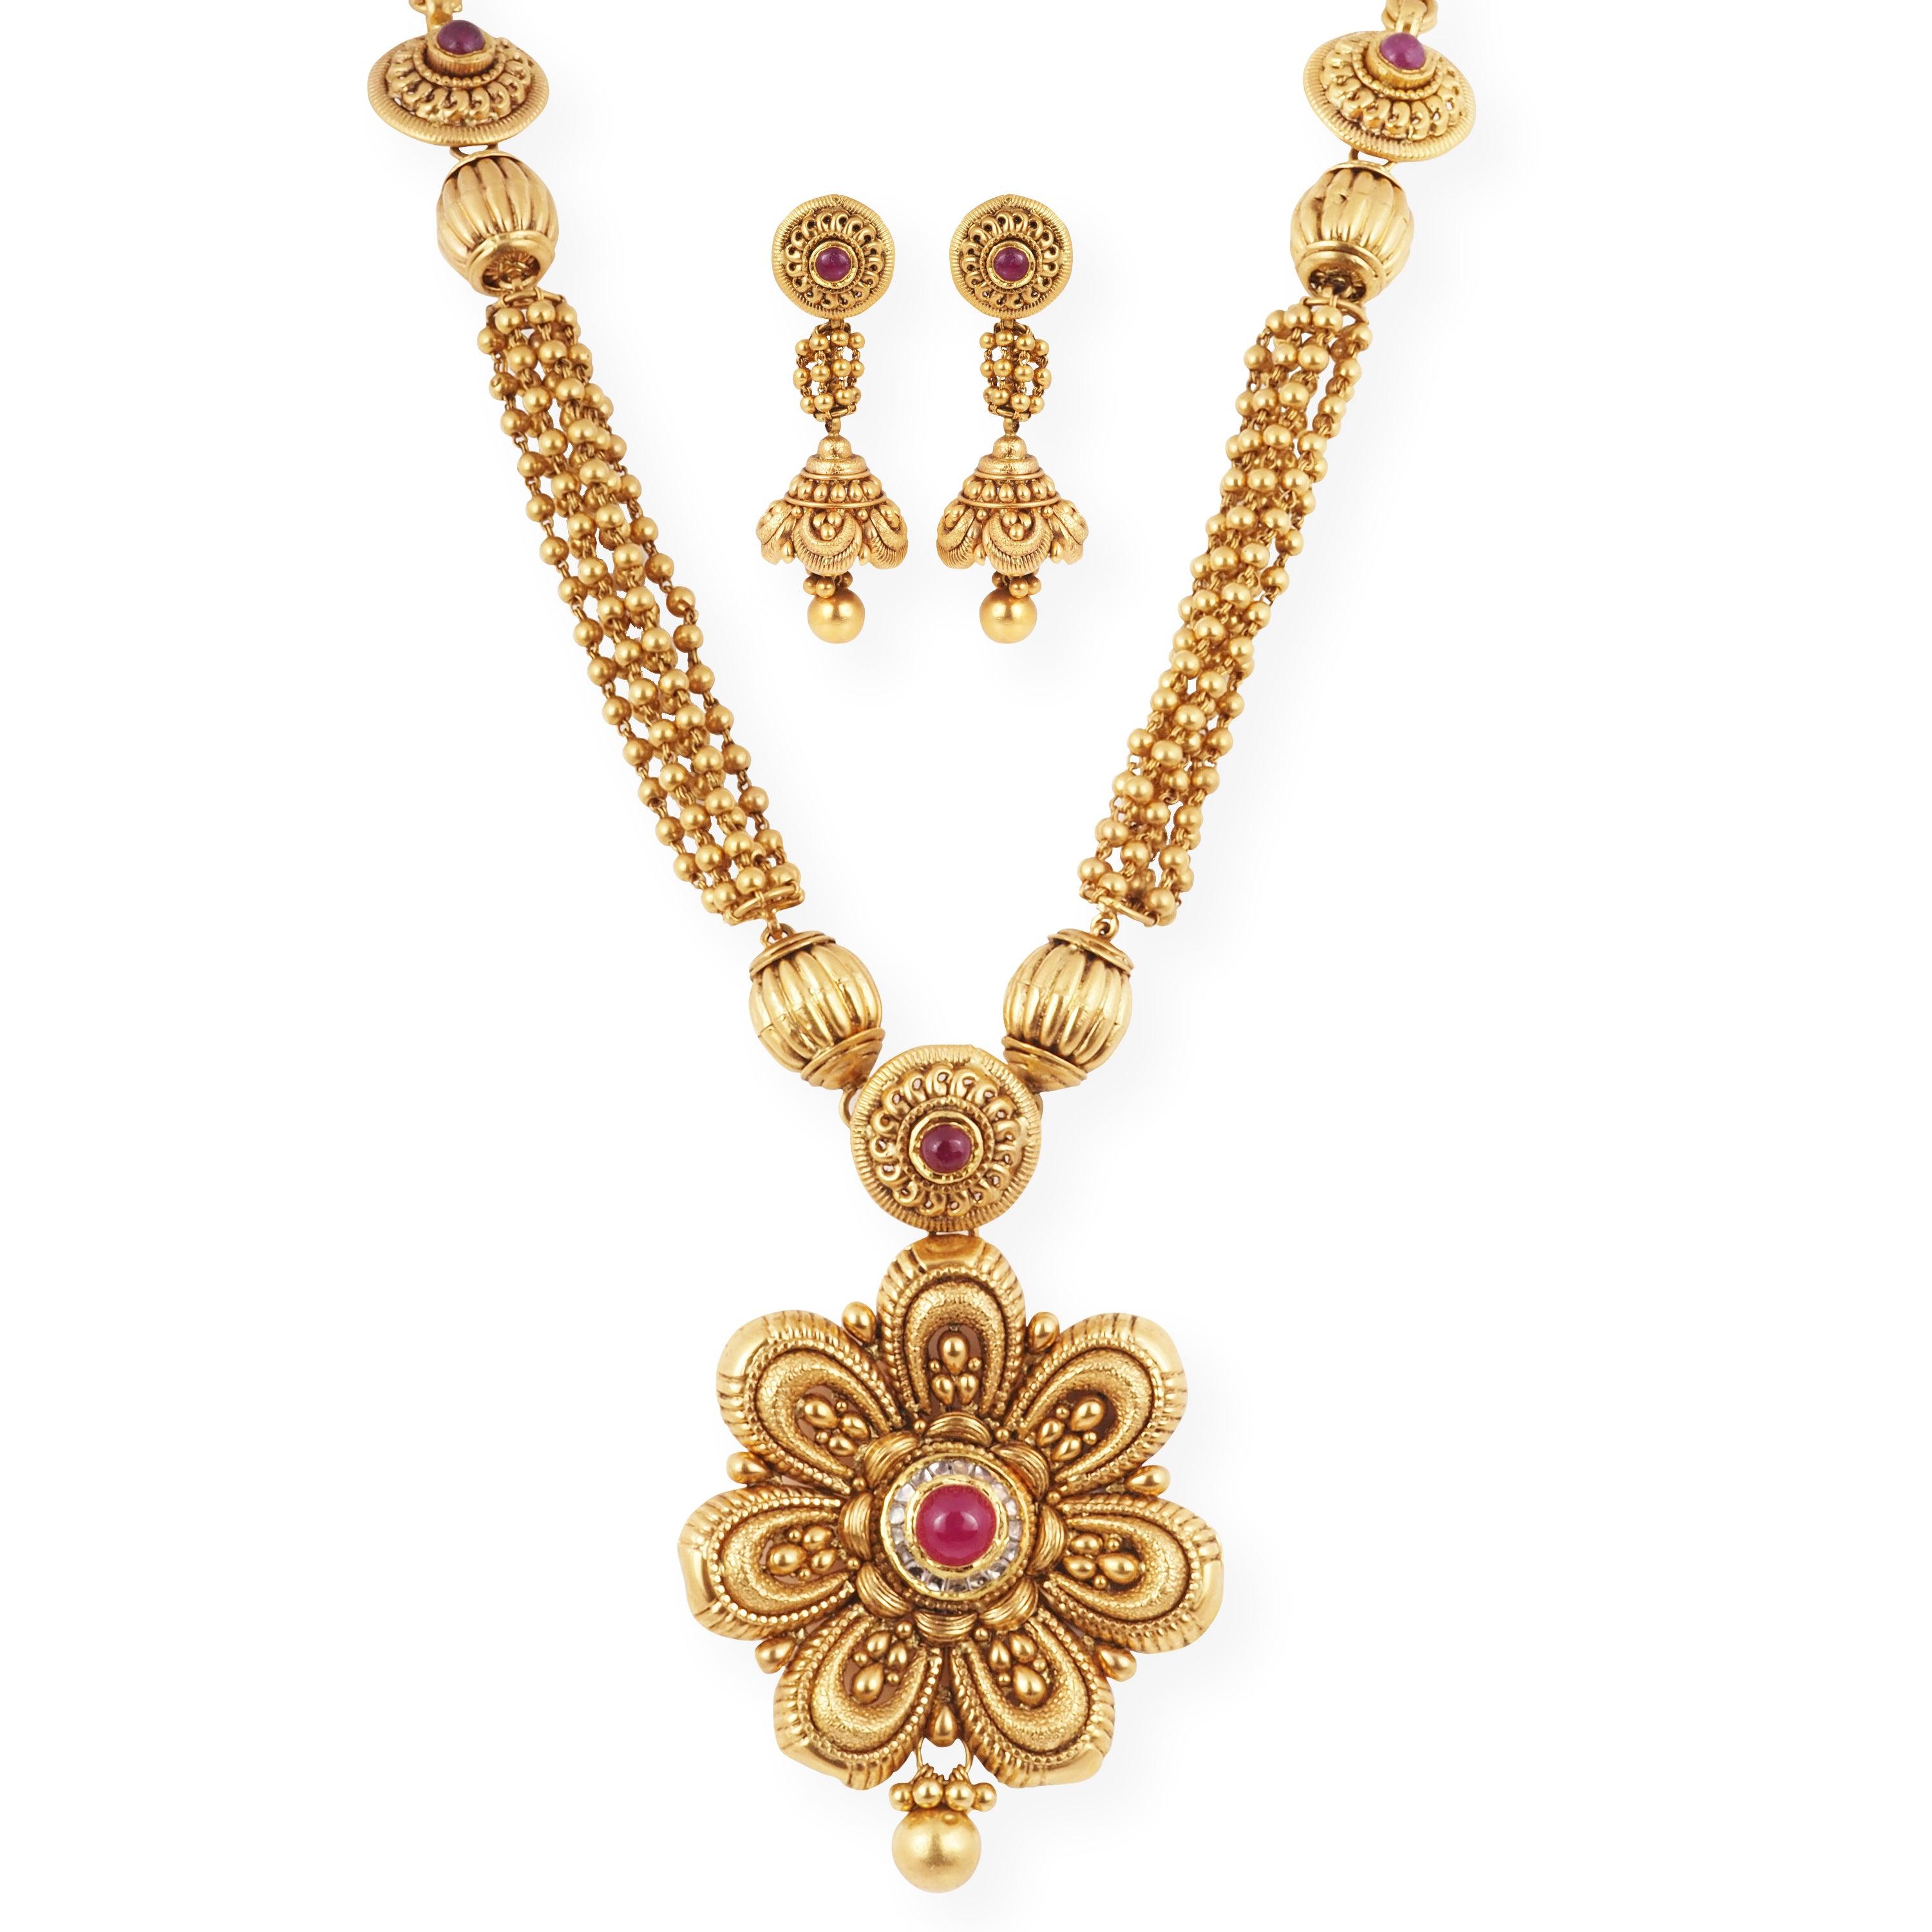 22ct Gold Antiquated Look Design Necklace Suite with Cubic Zirconia Stones & Hook Clasp-5191 - Minar Jewellers